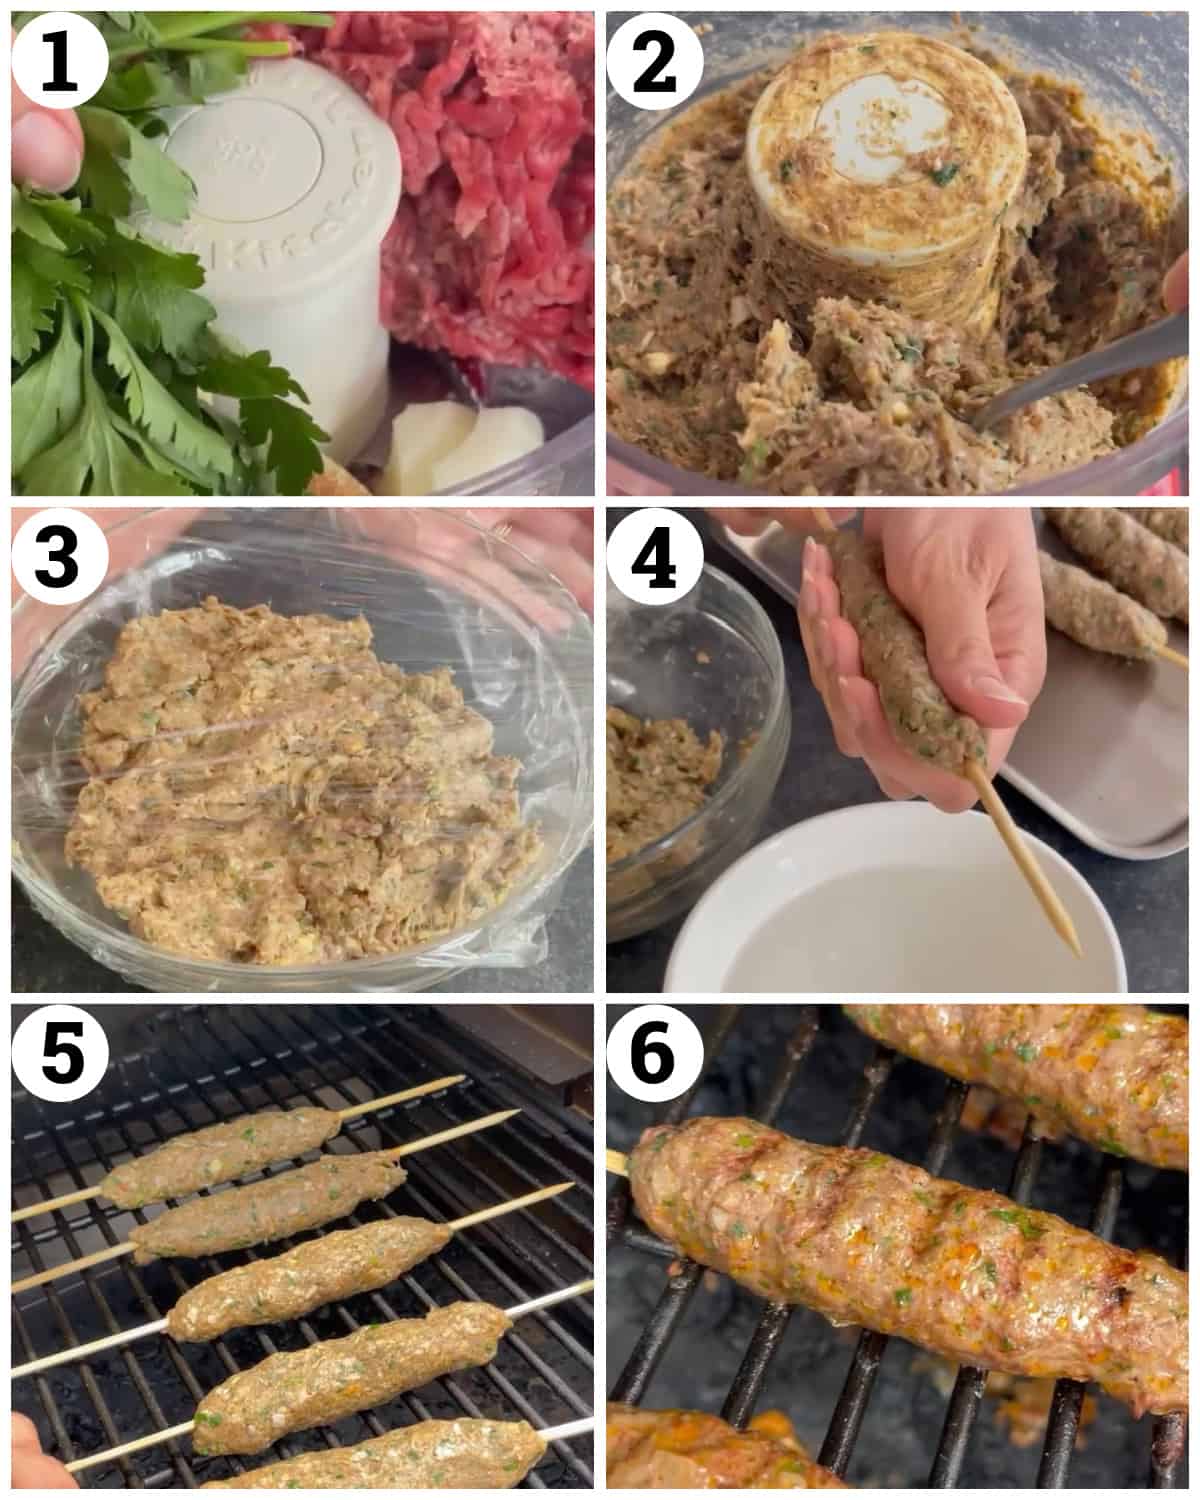 Mix all the ingredients then shape on skewers and gill. 